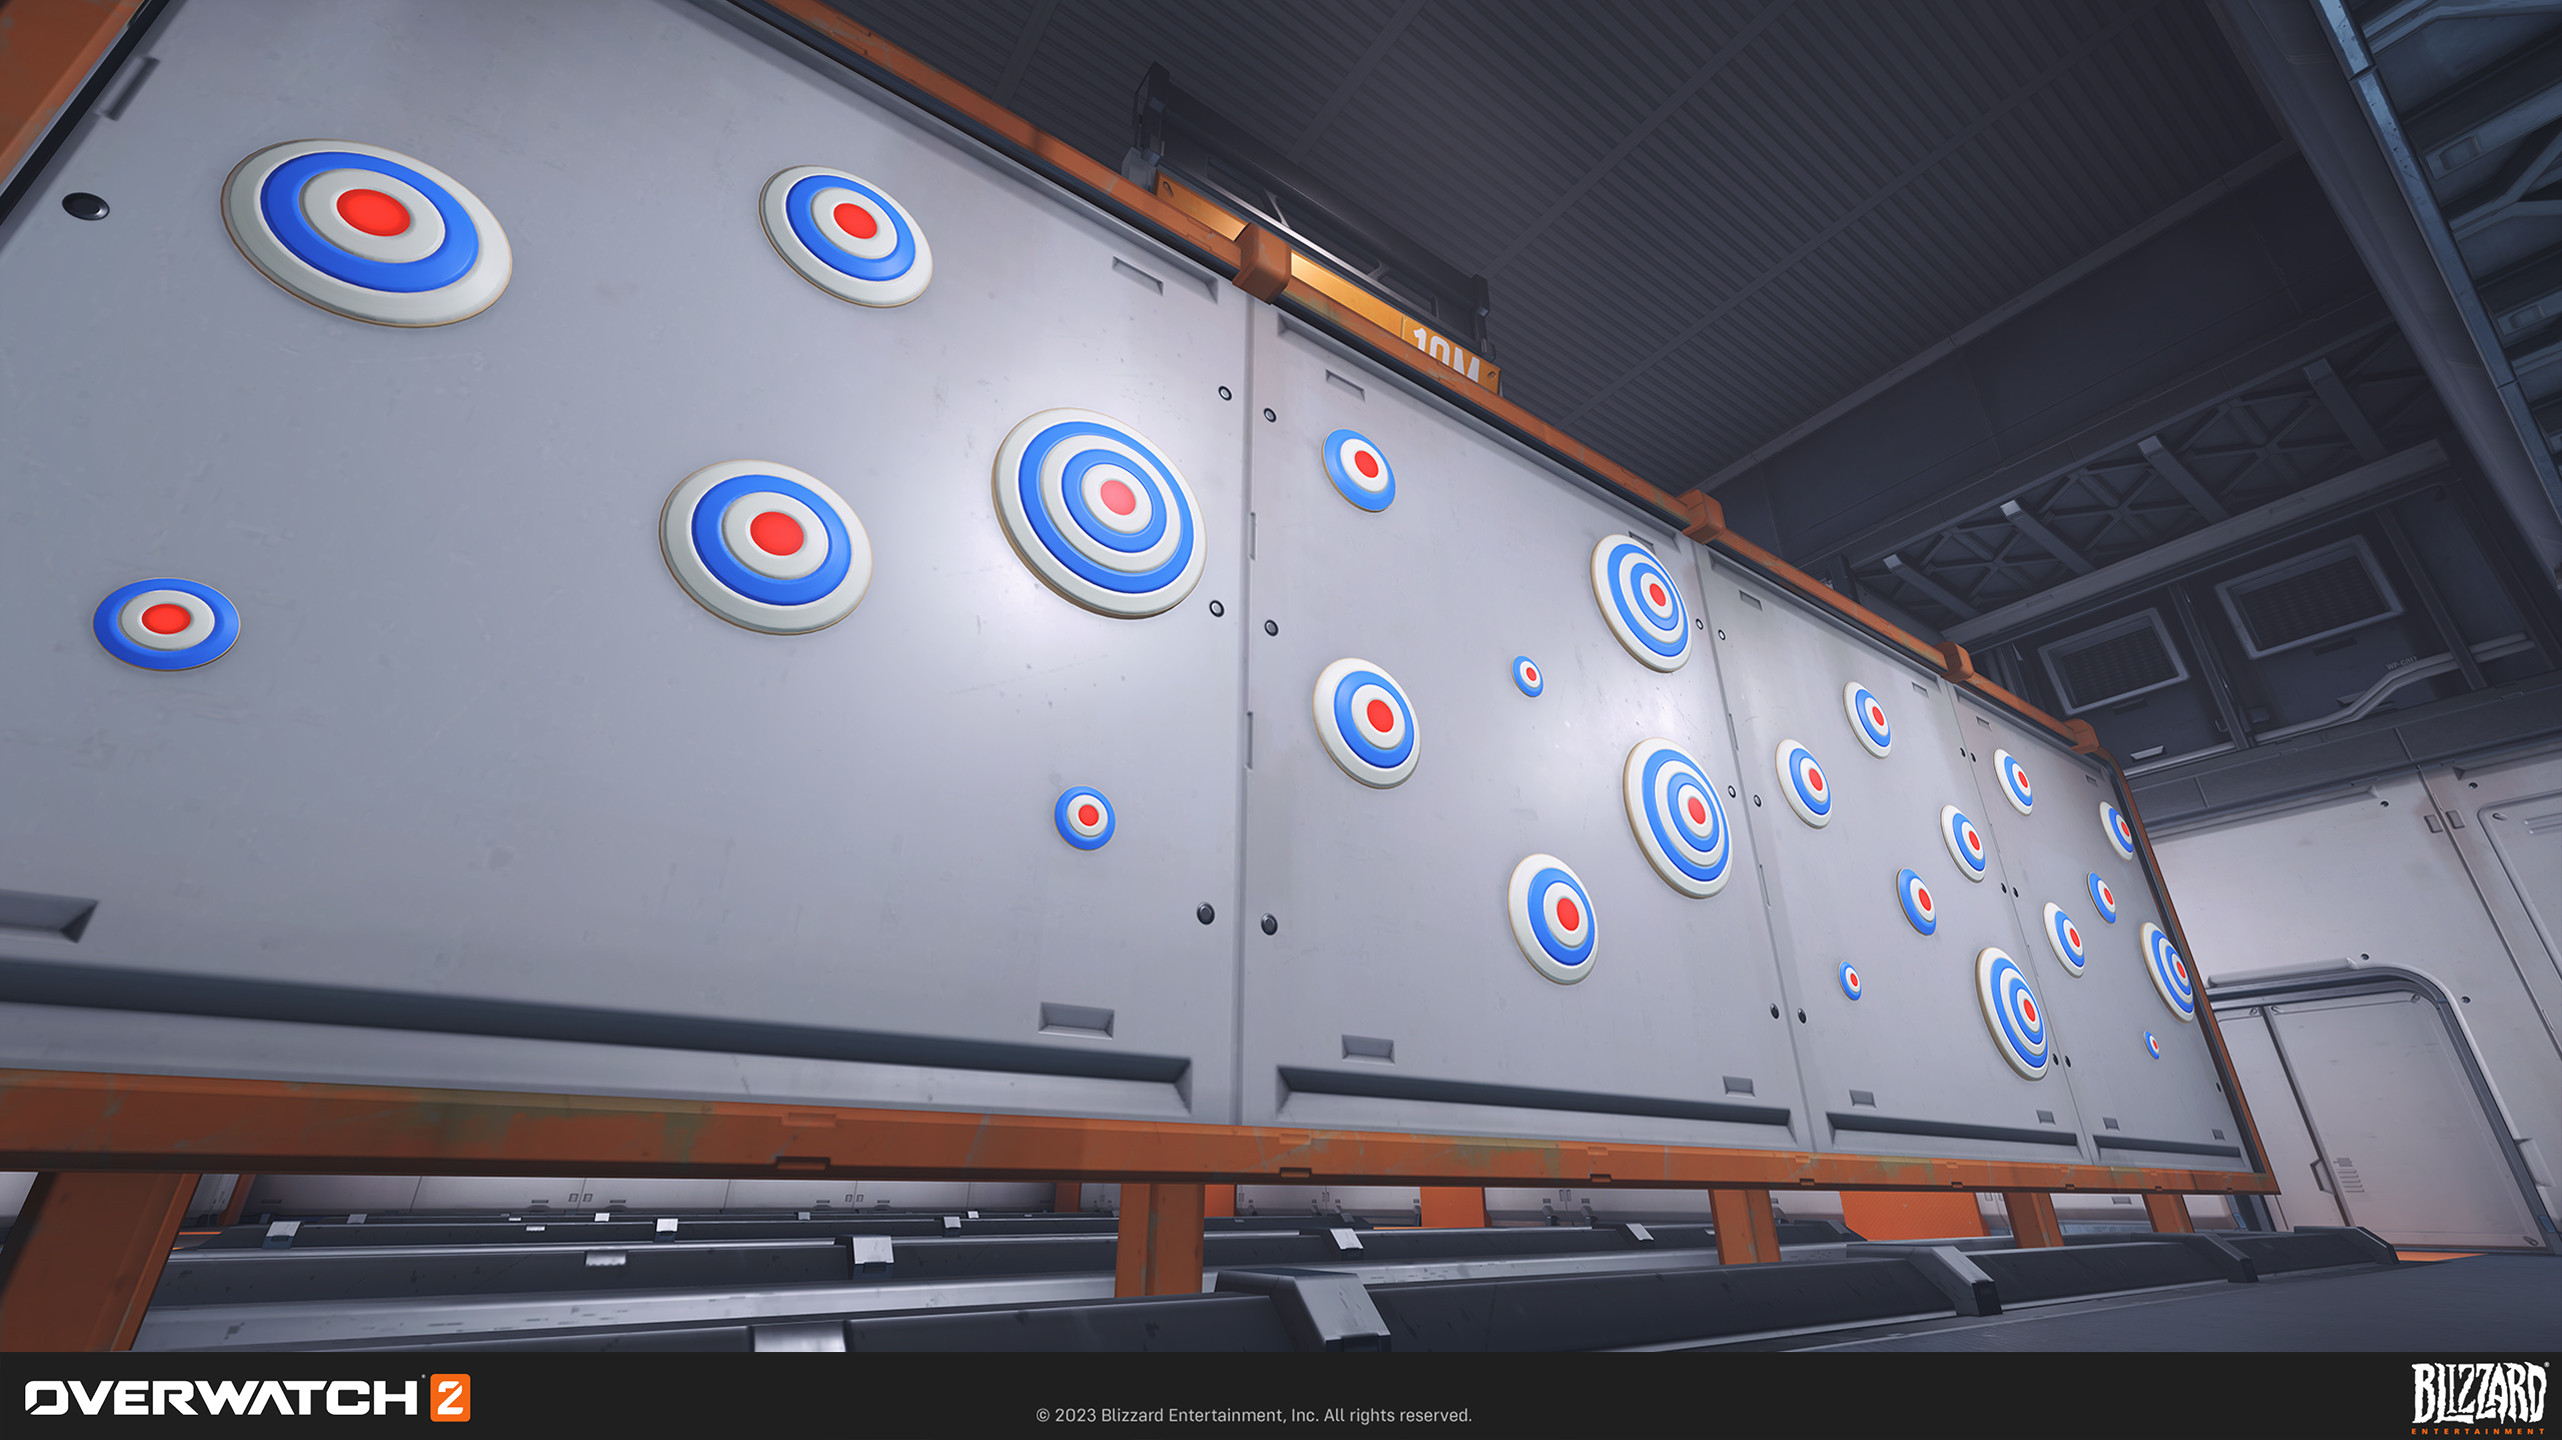 Training Range Targets: I worked with Cory Stockton on the gameplay team to create a few breakable targets. Shown in the context of the Practice Training Range.